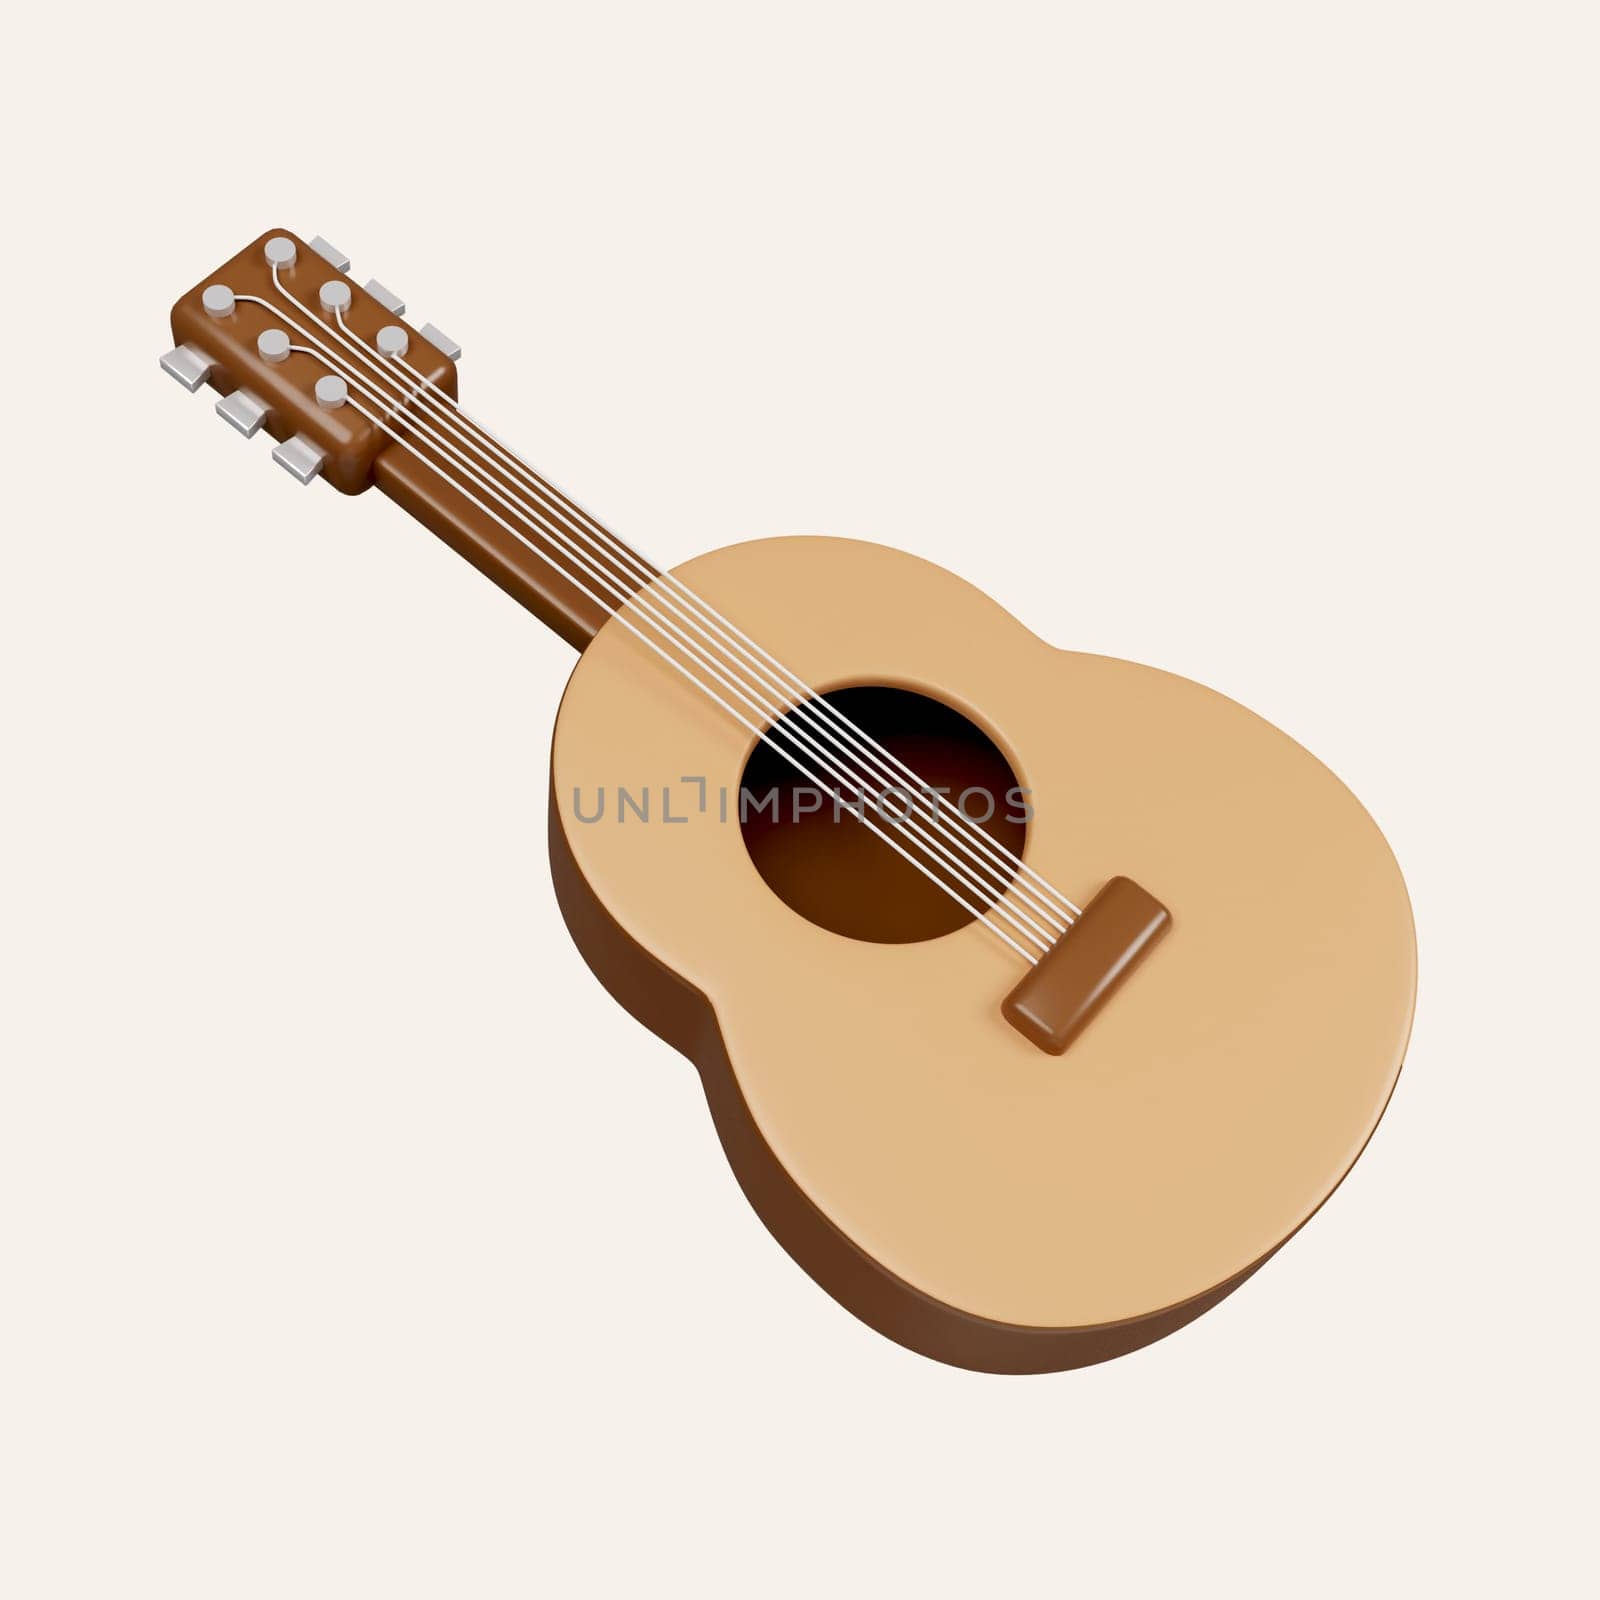 3d guitar. elements for camping, hiking , summer camp, traveling, trip. icon isolated on white background. 3d rendering illustration. Clipping path. by meepiangraphic